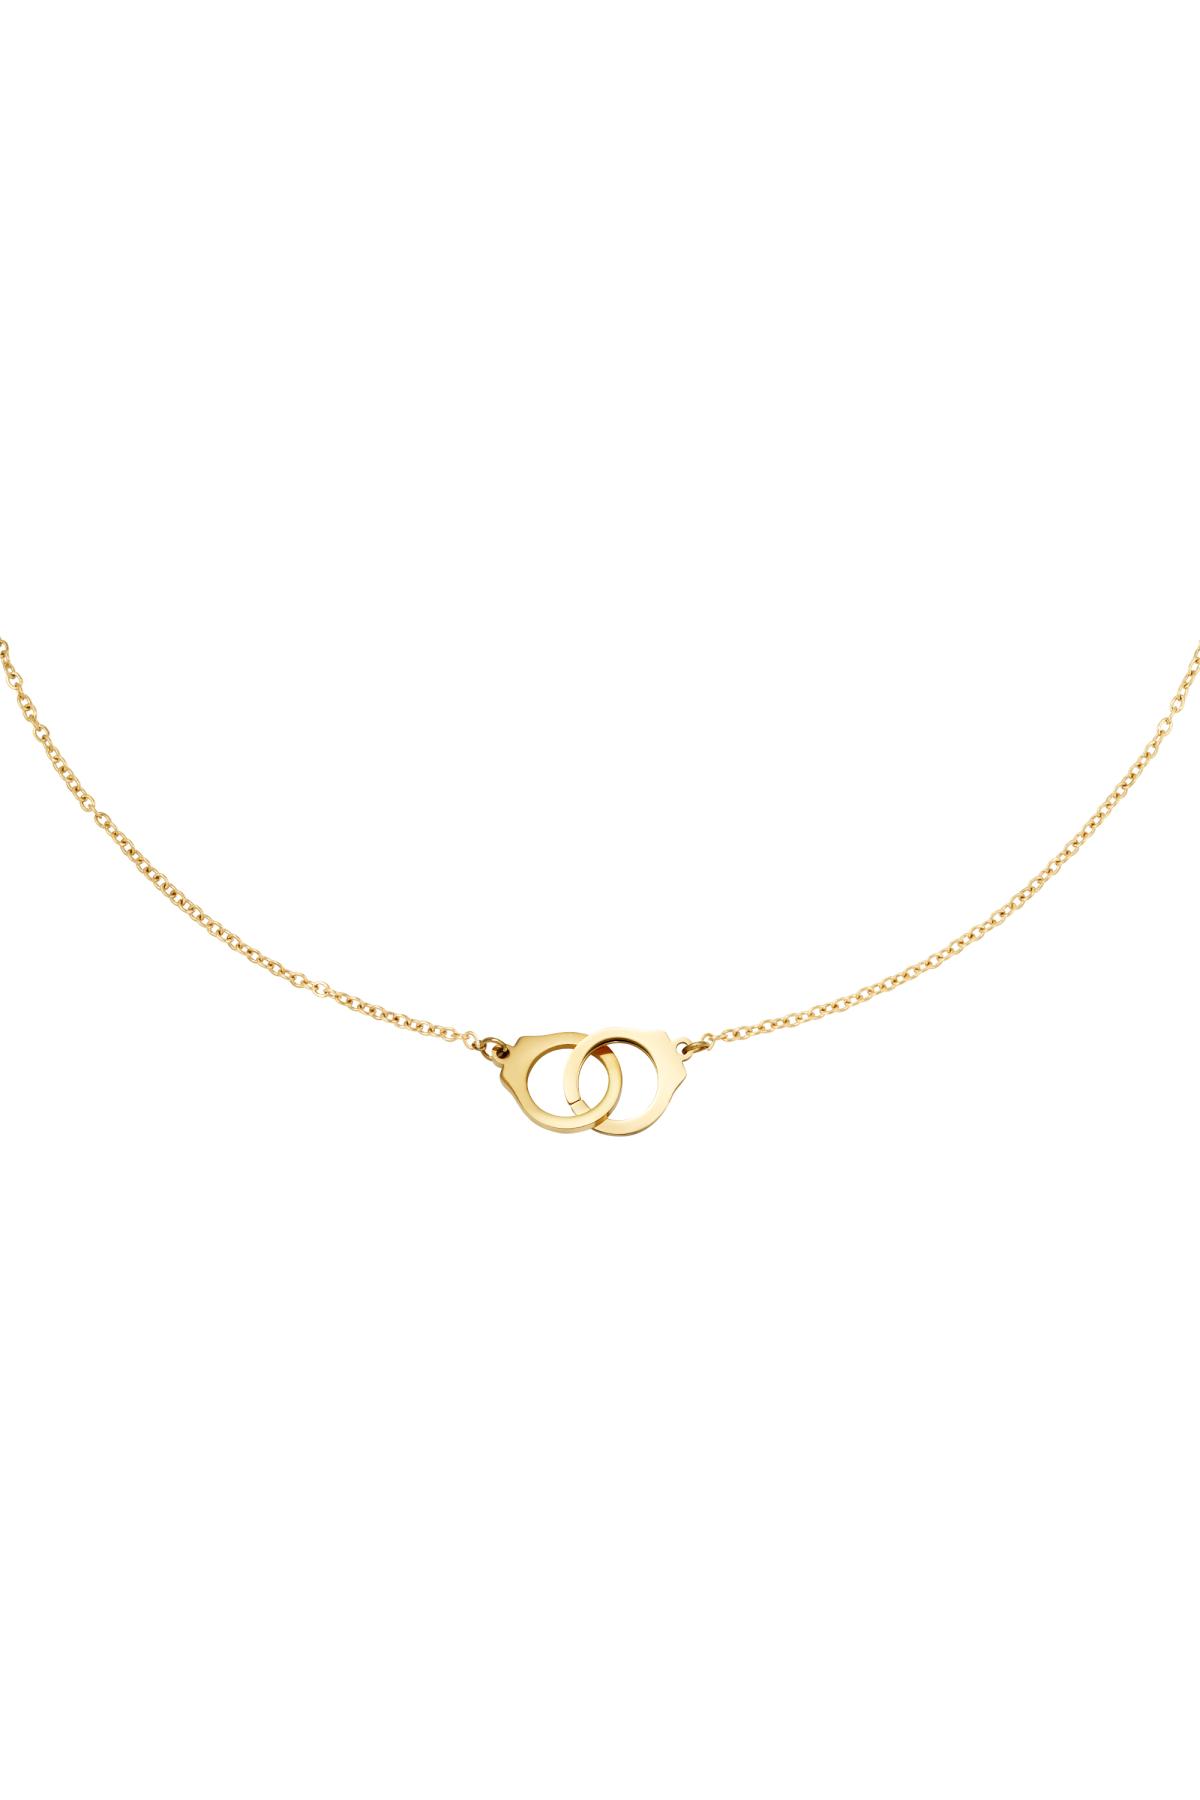 Necklace Handcuffs Gold Stainless Steel